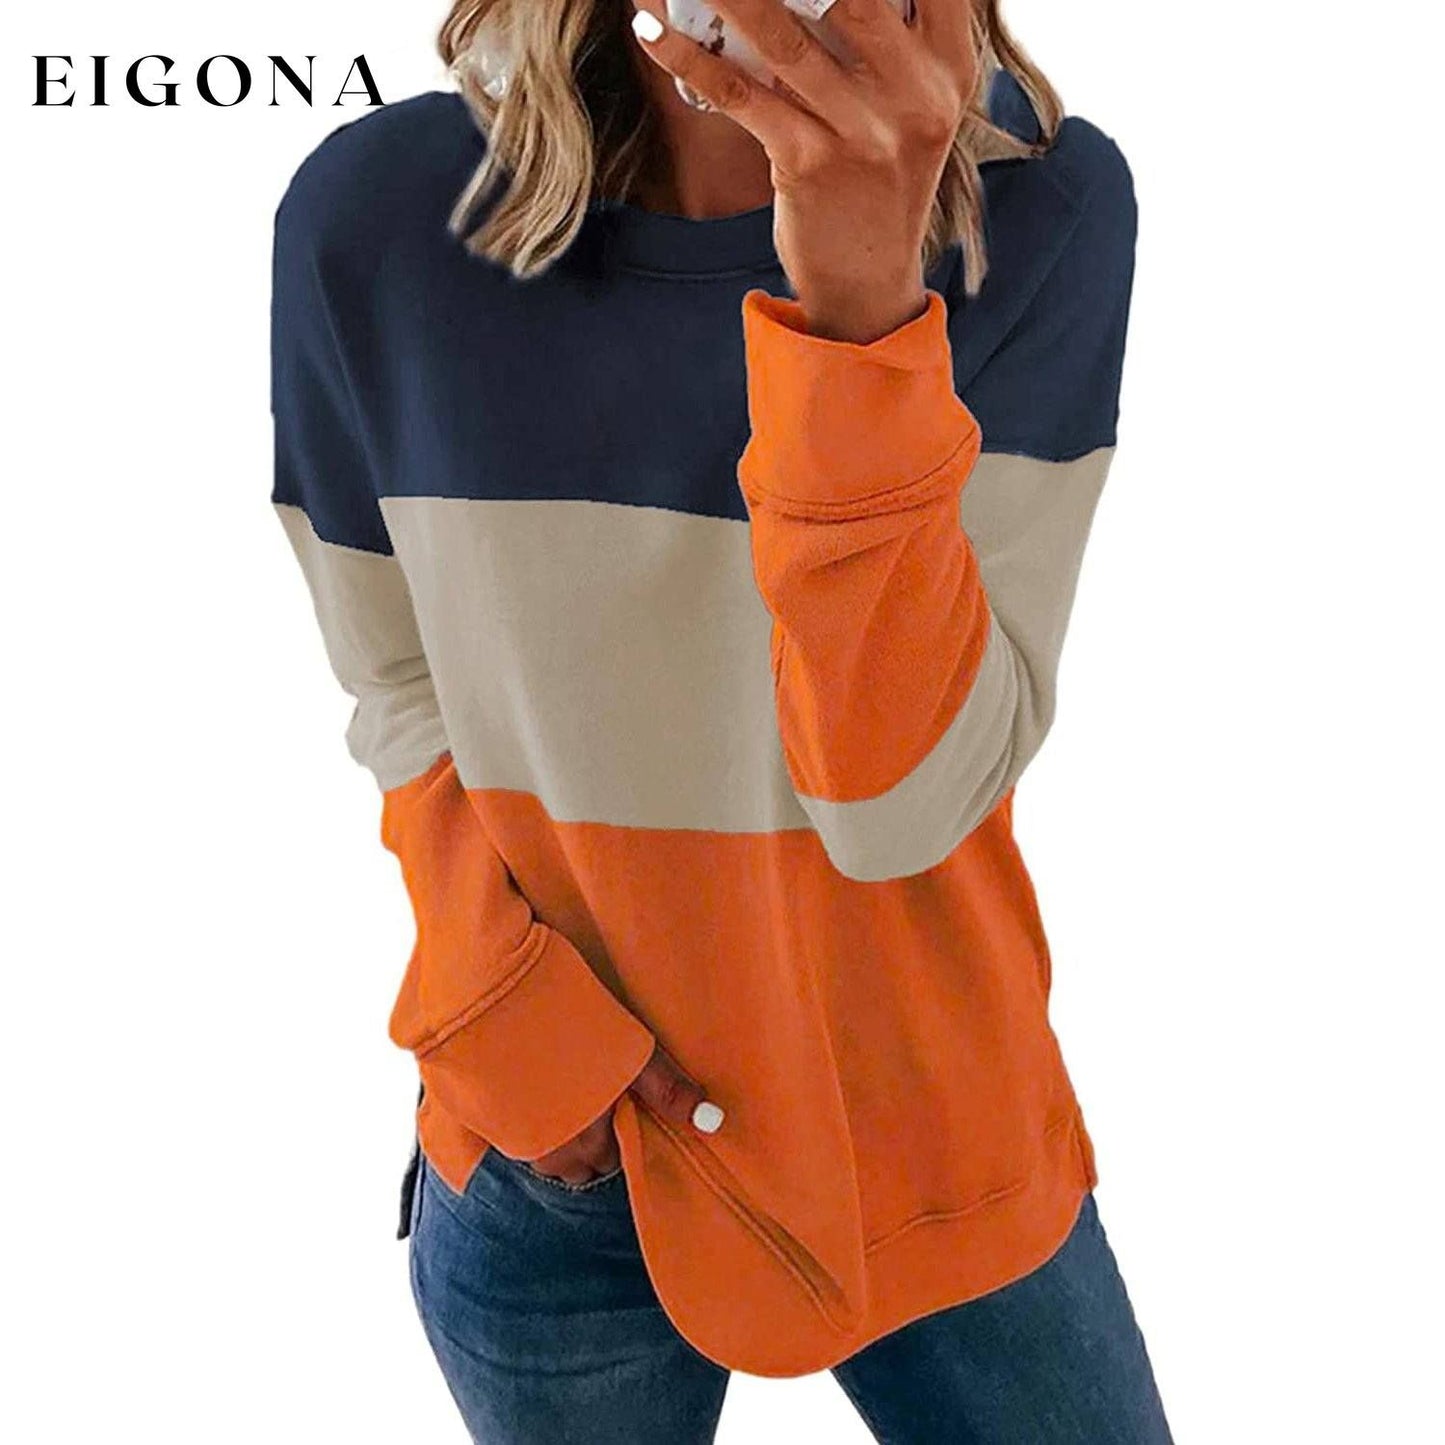 Casual Crewneck Tie Dye Sweatshirt Striped Printed Loose Soft Long Sleeve Pullover Tops Shirts Orange __stock:500 clothes refund_fee:1200 tops